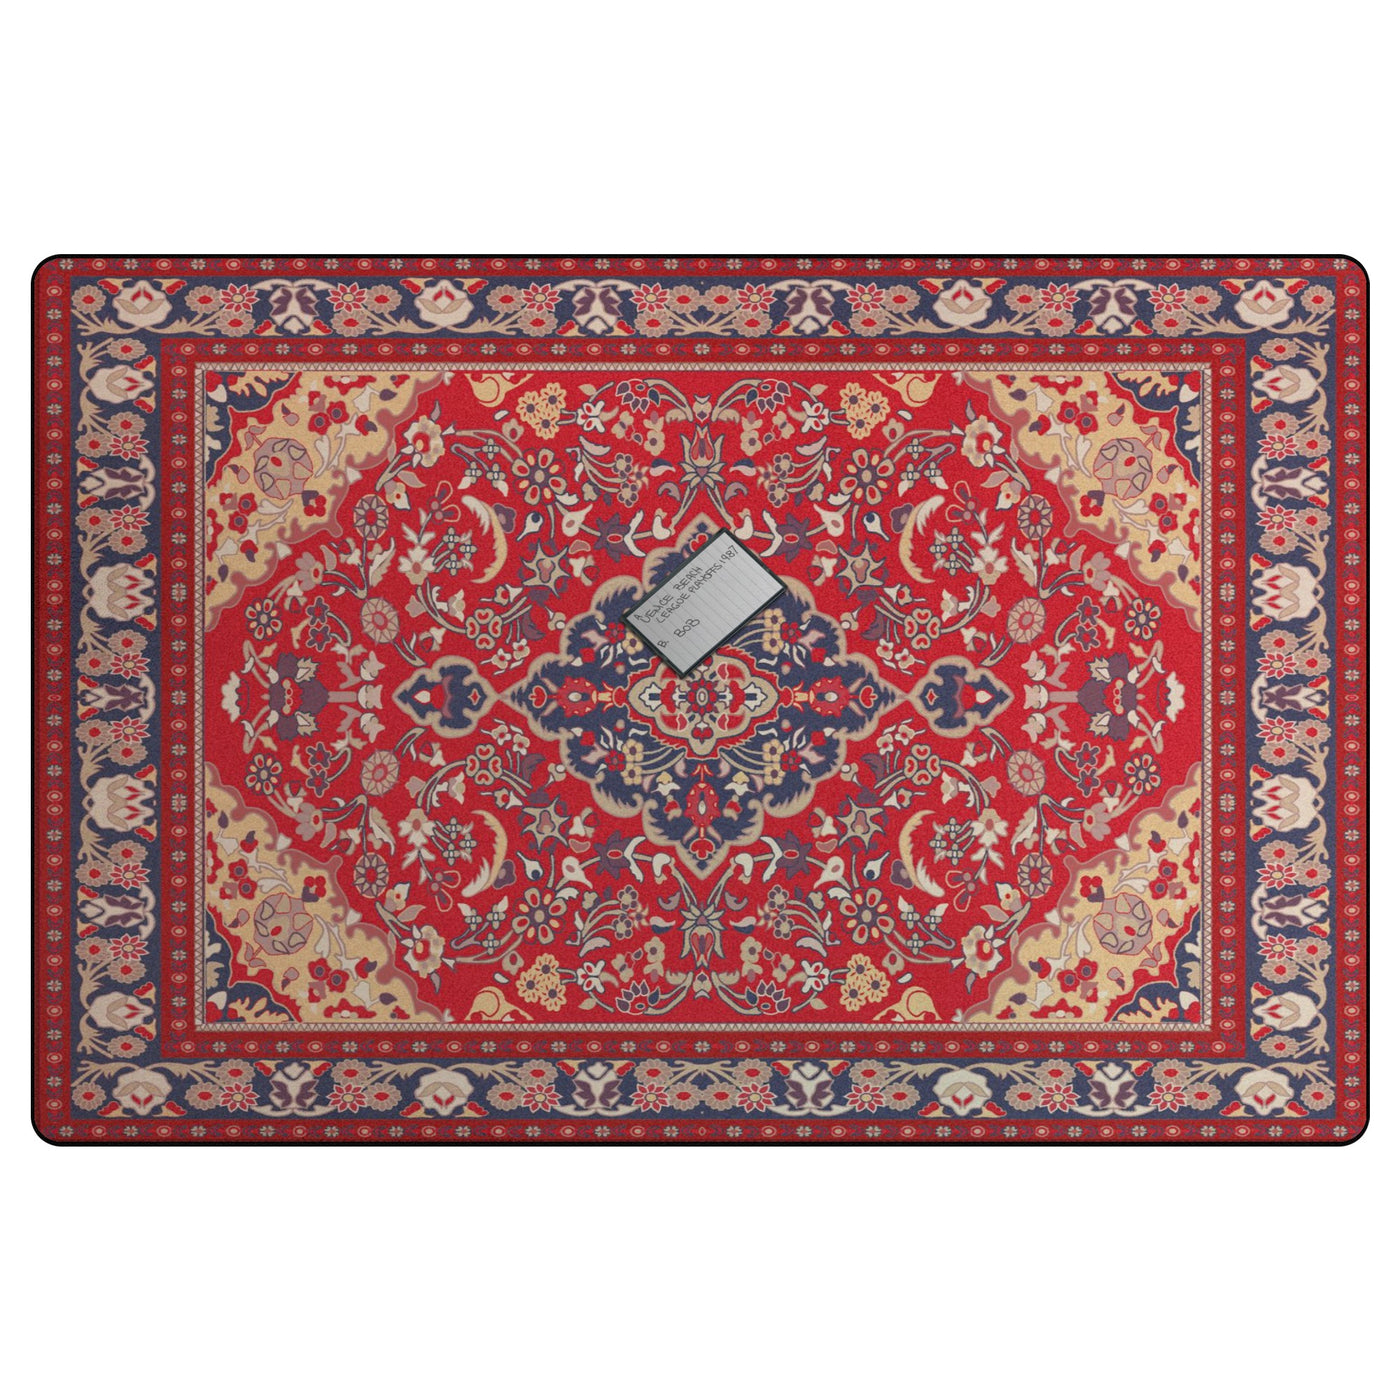 Lebowskis Rug with The Dudes Bowling Tape Living Room Carpet (200cm x 150cm)